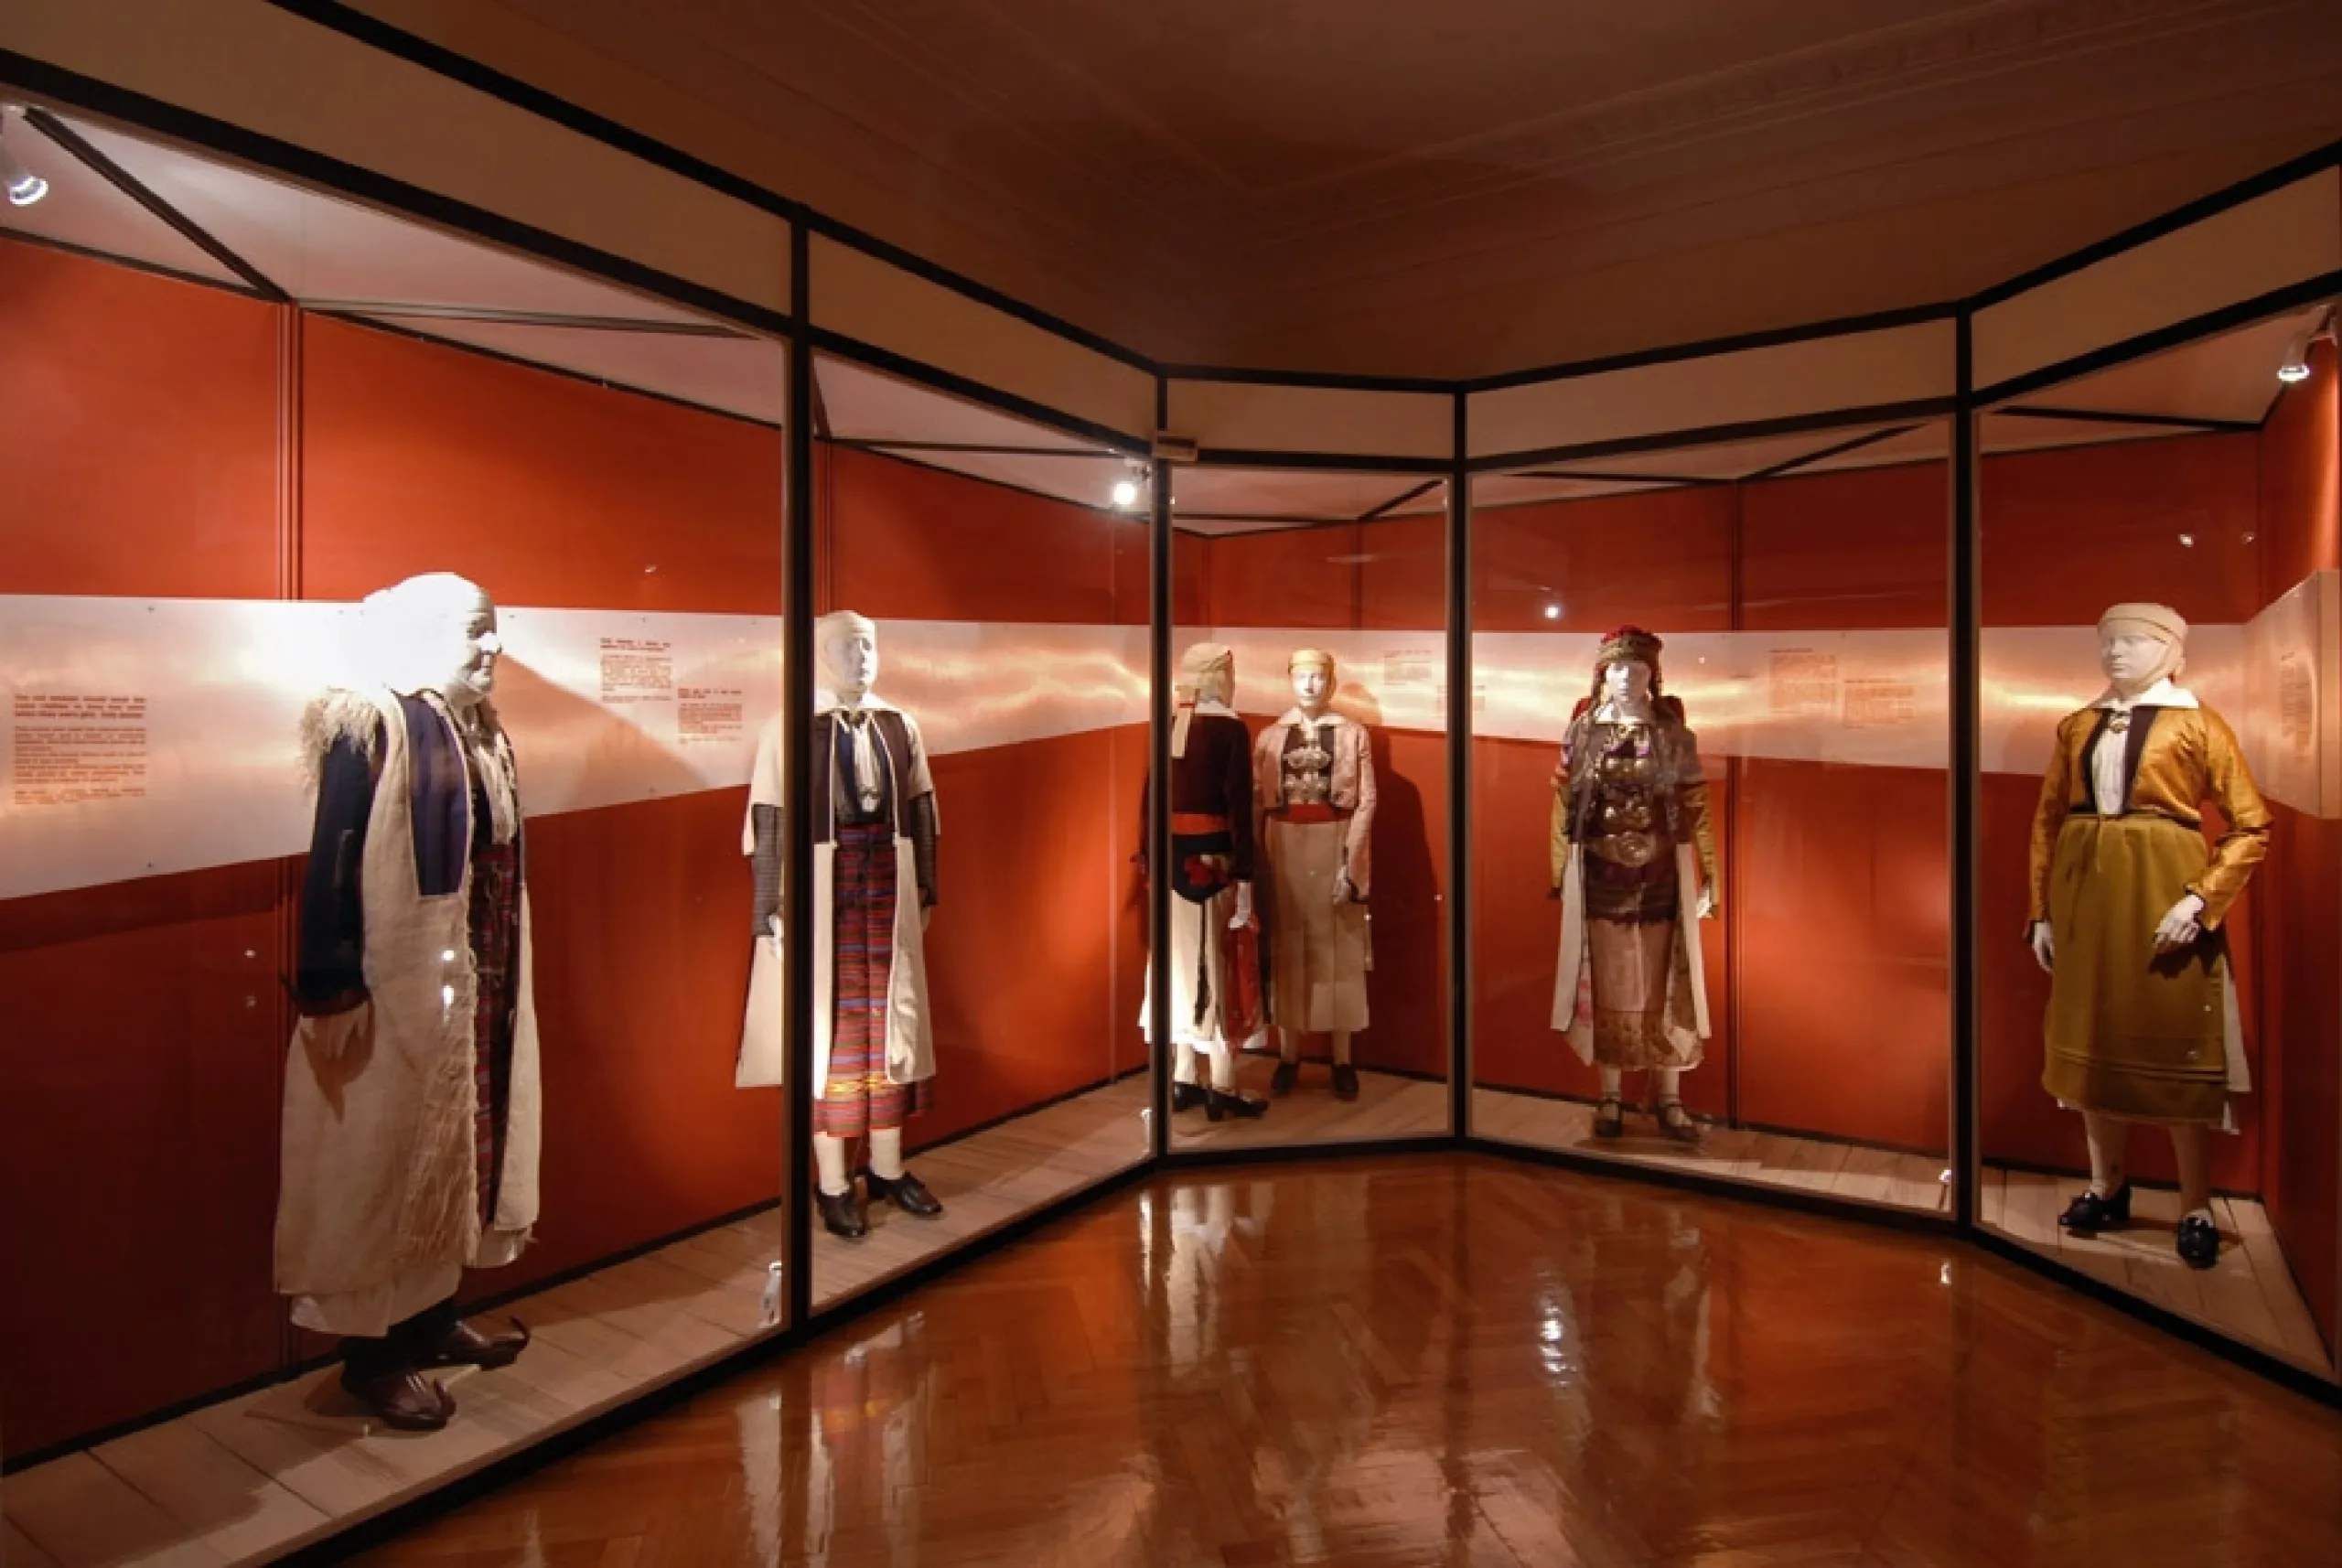 Installation view of the temporary exhibition “Pogoni – women’s costumes”. CMLE 2006. Photograph by Studio Kominis.